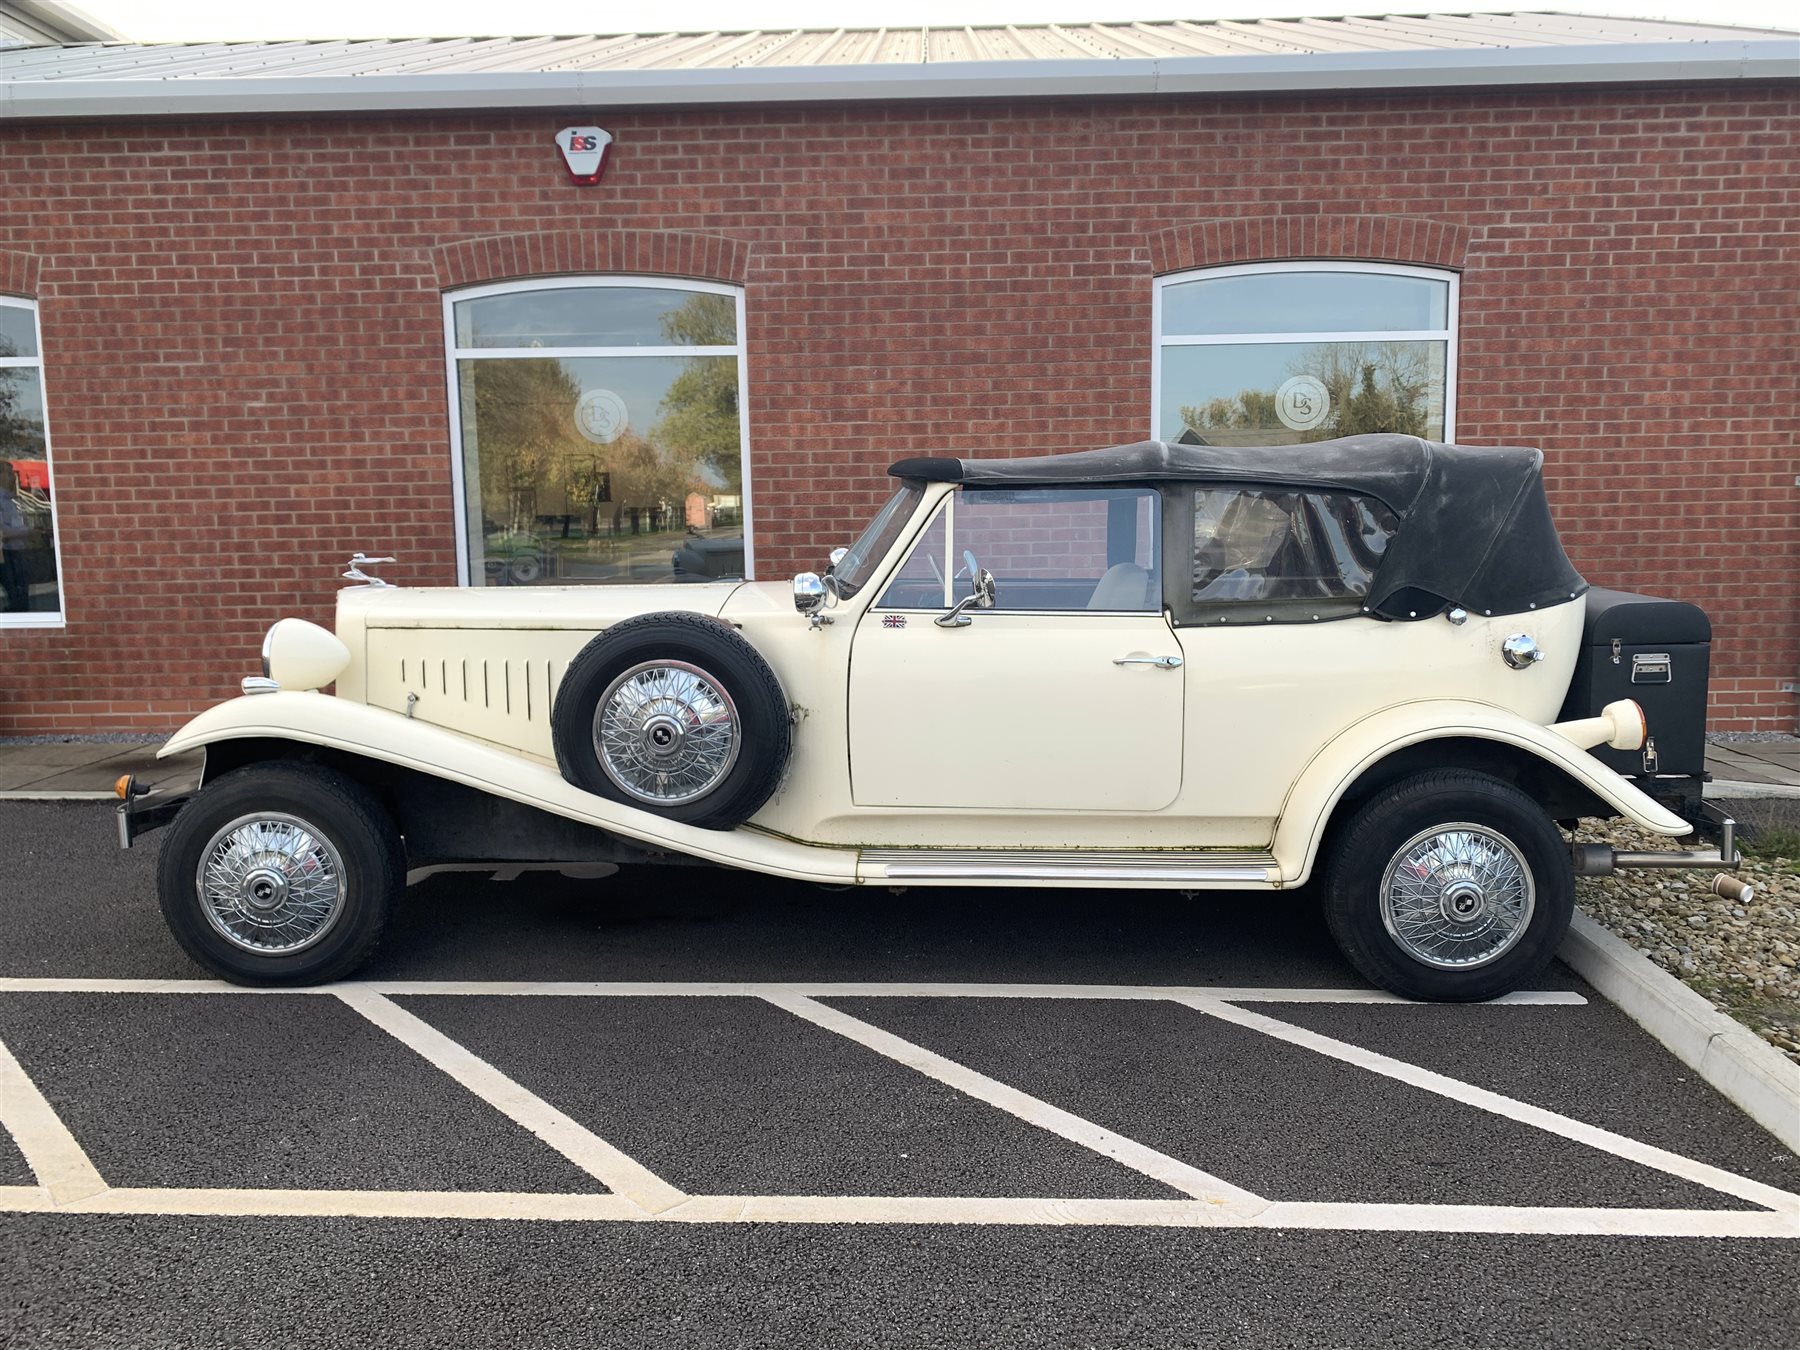 Beauford wedding car - 1980's replica of a classic 1930's two door grand tourer luxury car, with fou - Image 2 of 16